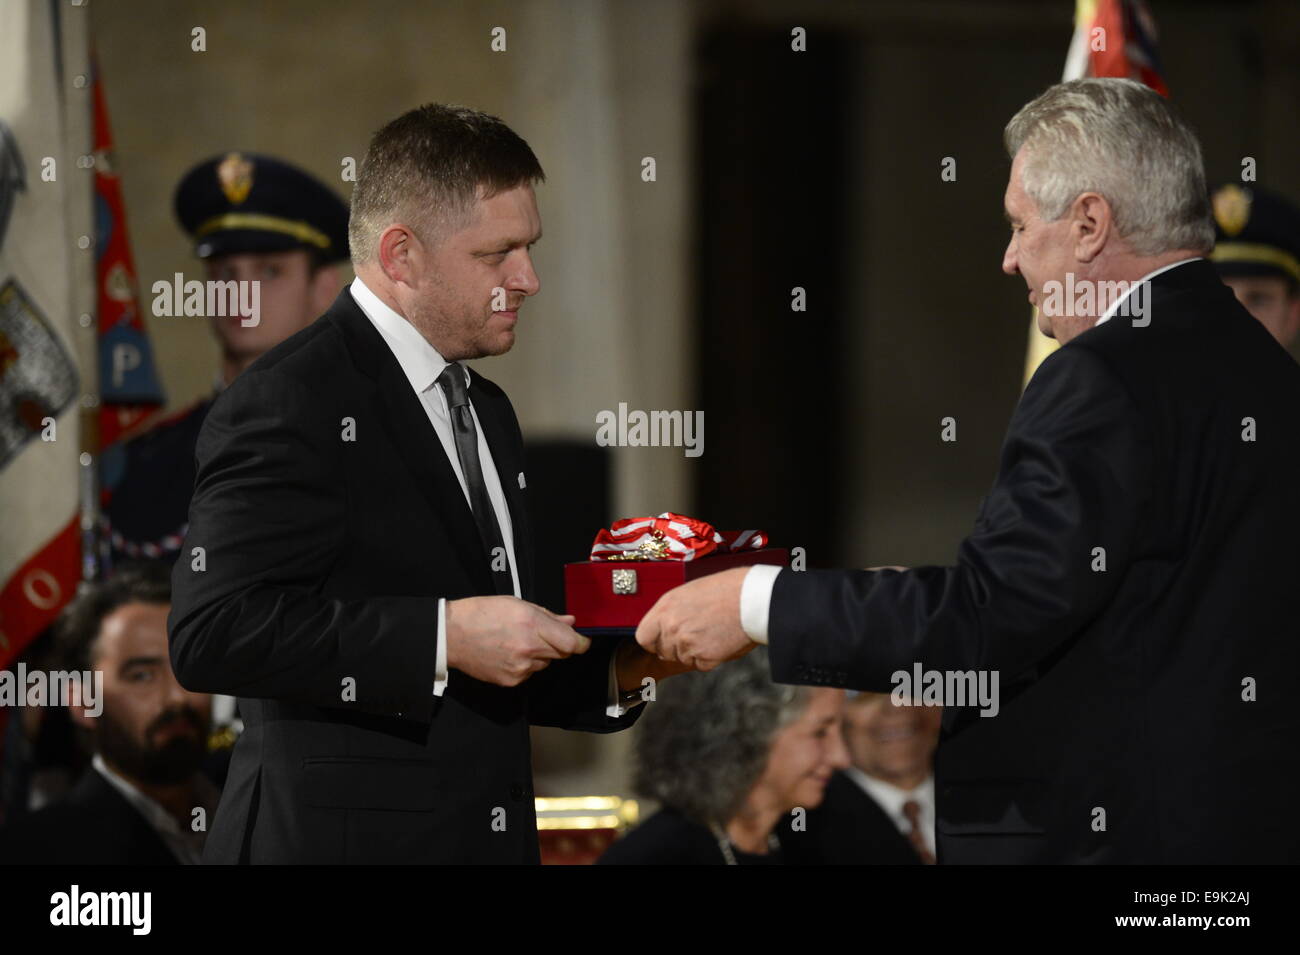 Prague, Czech Republic. 28th Oct, 2014. Czech President Milos Zeman (right) bestowed the Order of the White Lion, the highest Czech state award, on Slovak Prime Minister Robert Fico at a ceremony at Prague Castle today, on Tuesday, October 28, 2014. Fico have been decorated for their outstanding contribution for the benefit of the Czech Republic. Credit:  CTK/Alamy Live News Stock Photo